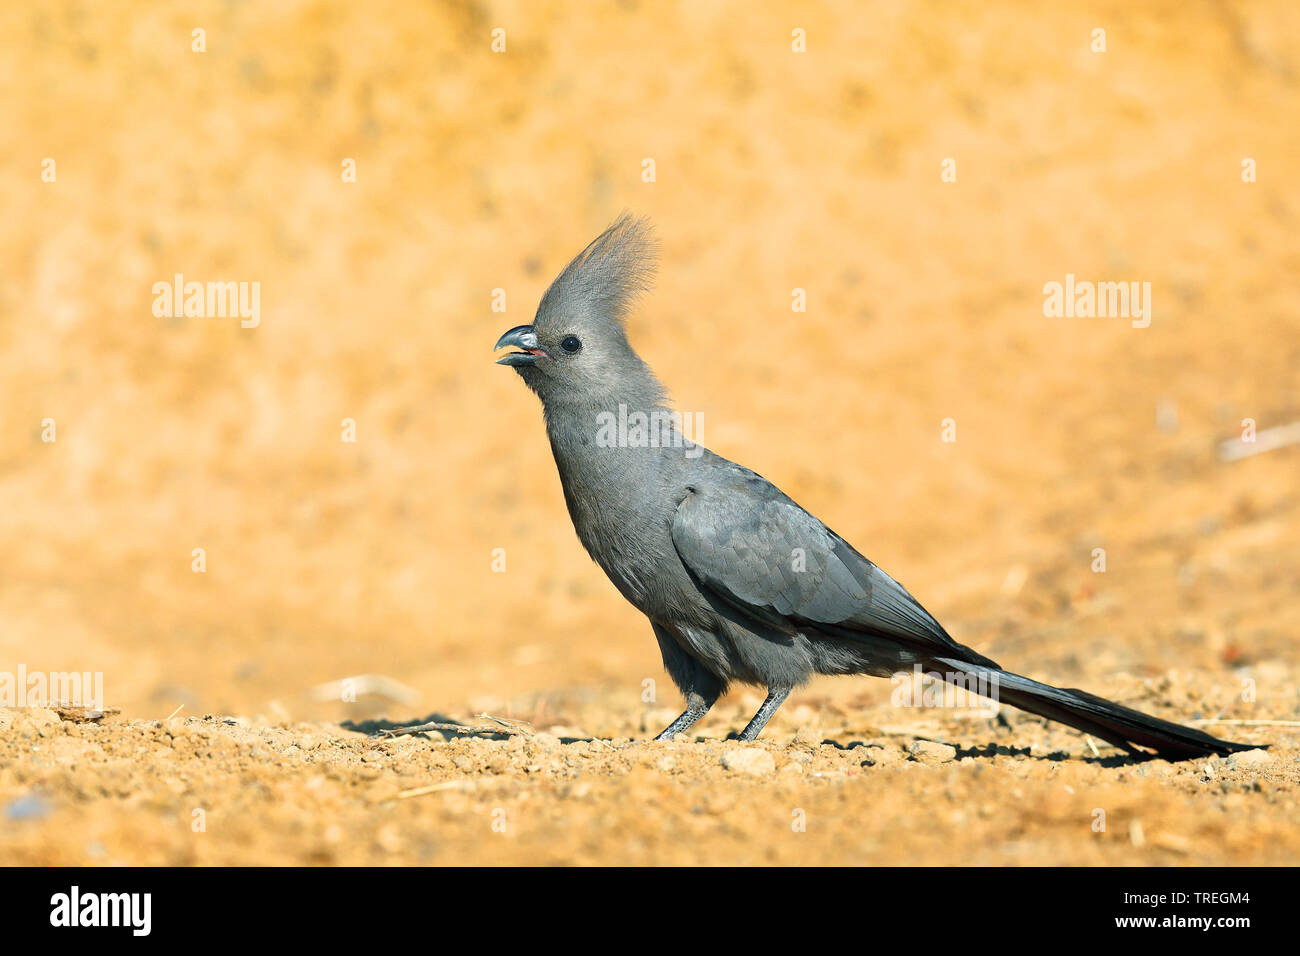 go-away bird (Corythaixoides concolor), sitting on the ground, South Africa, North West Province, Pilanesberg National Park Stock Photo